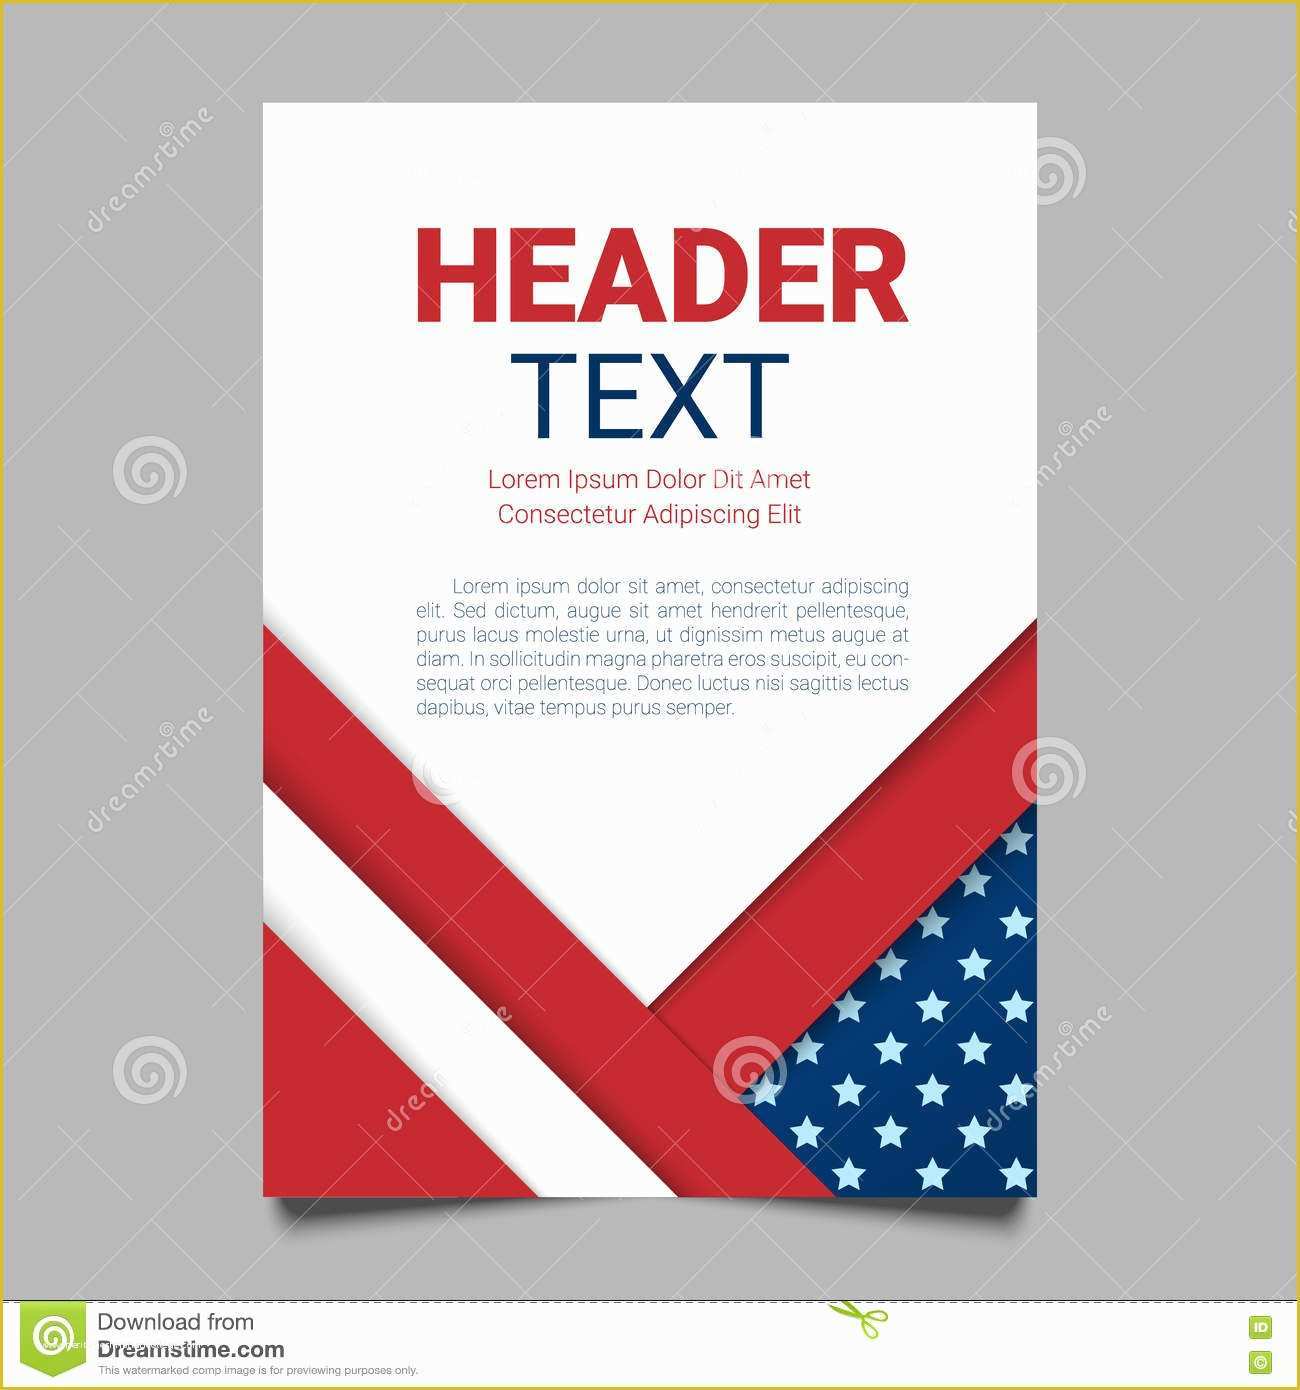 Free Patriotic Flyer Template Of Usa Patriotic Background Vector Illustration with Text